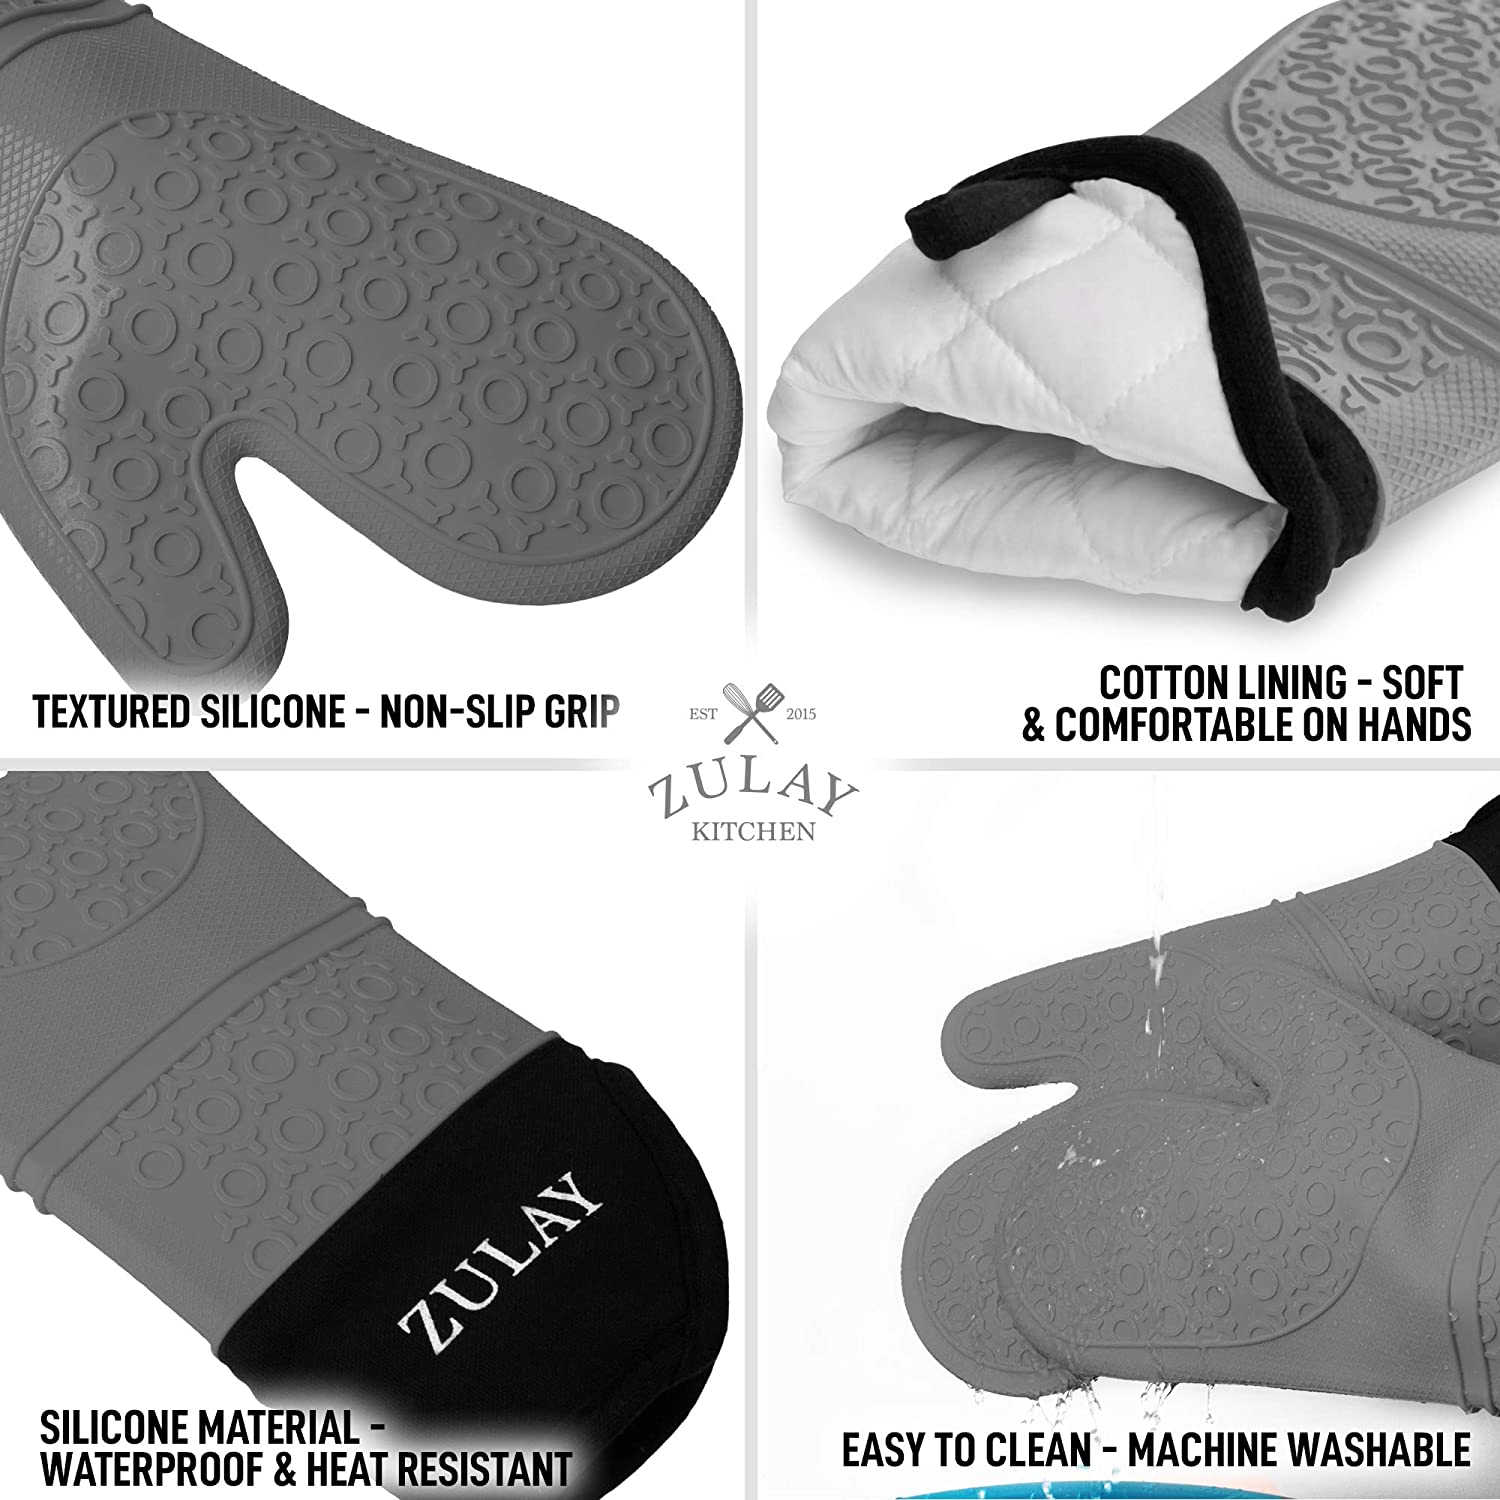 Foodobay Silicone Oven Mitts - 12.5” Jet Black Oven Mitts Heat Resistant  500F - Grippy Design,Soft Lining Silicone Oven Gloves - Oven Mits Set for